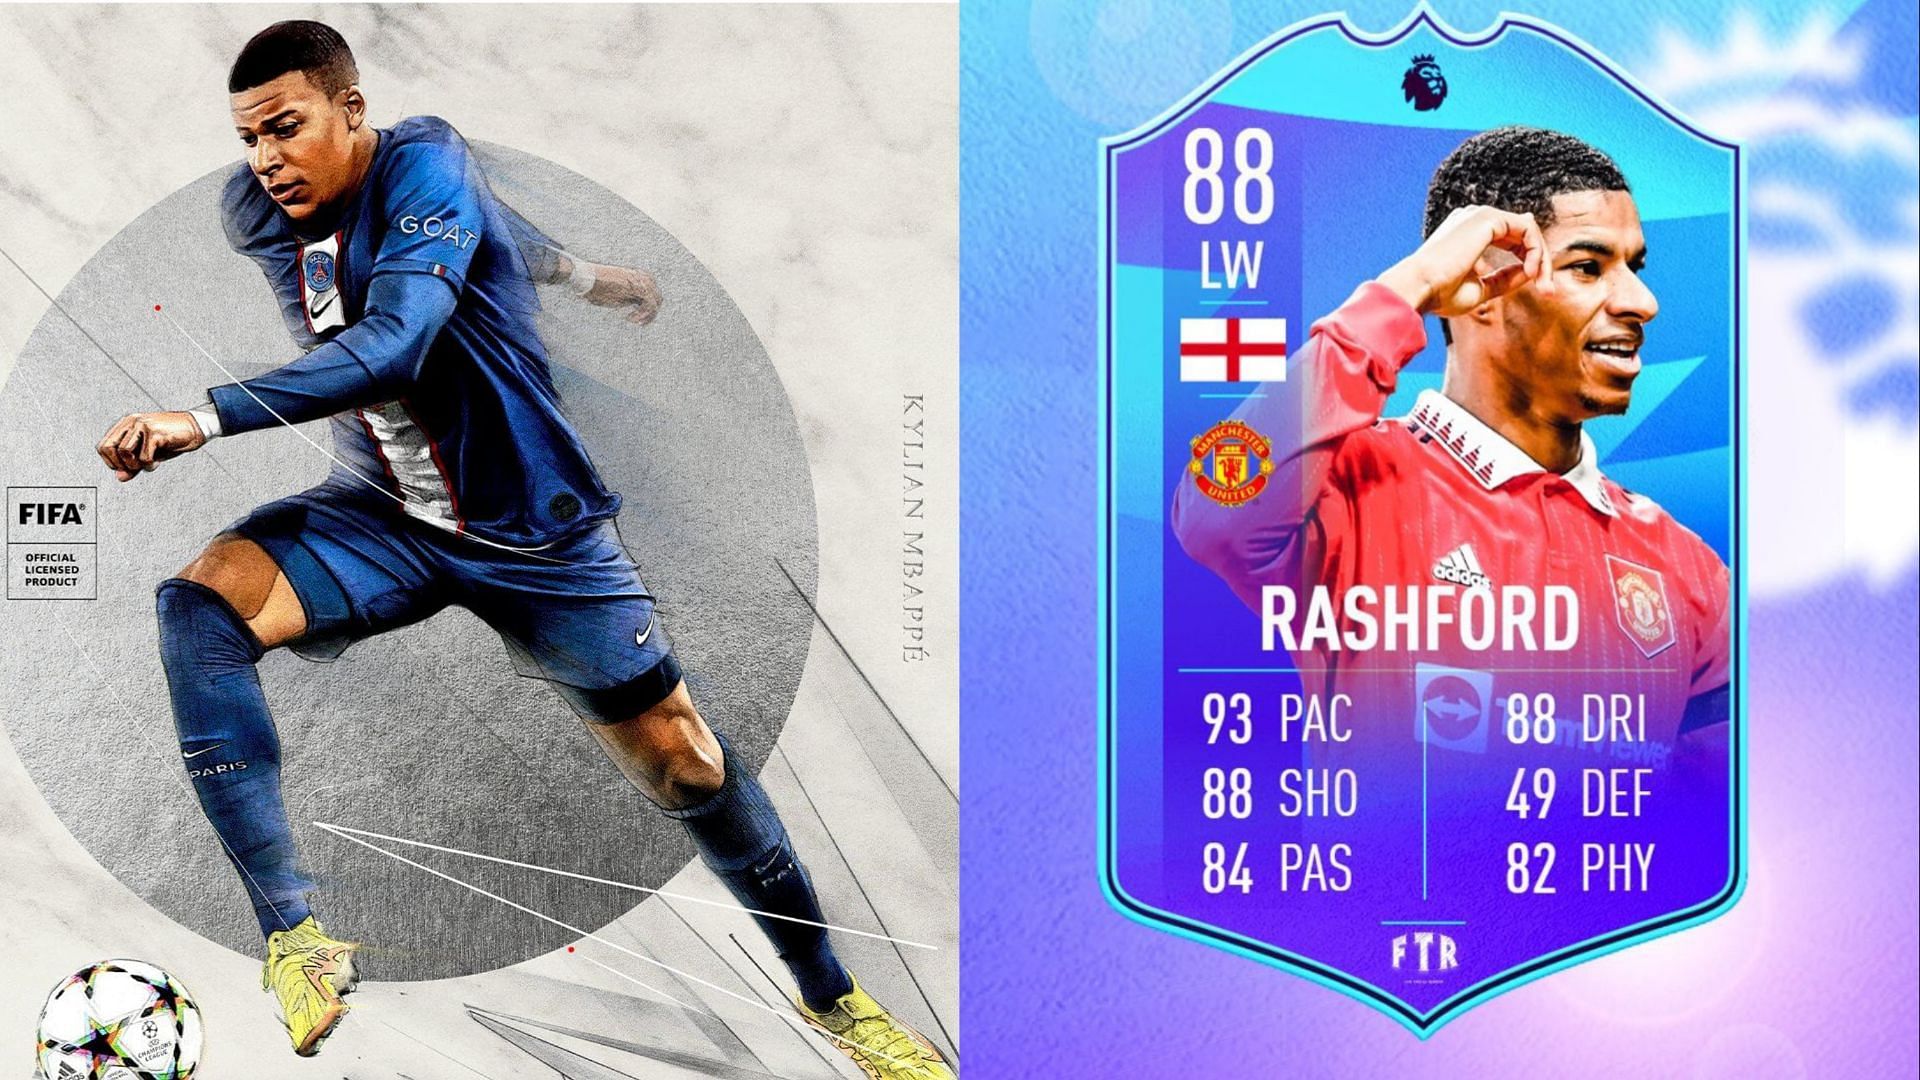 The Marcus Rashford Premier League POTM SBC will complete a hat-trick for the English attacker in FIFA 23 (images via EA sports. Twitter/FTR)